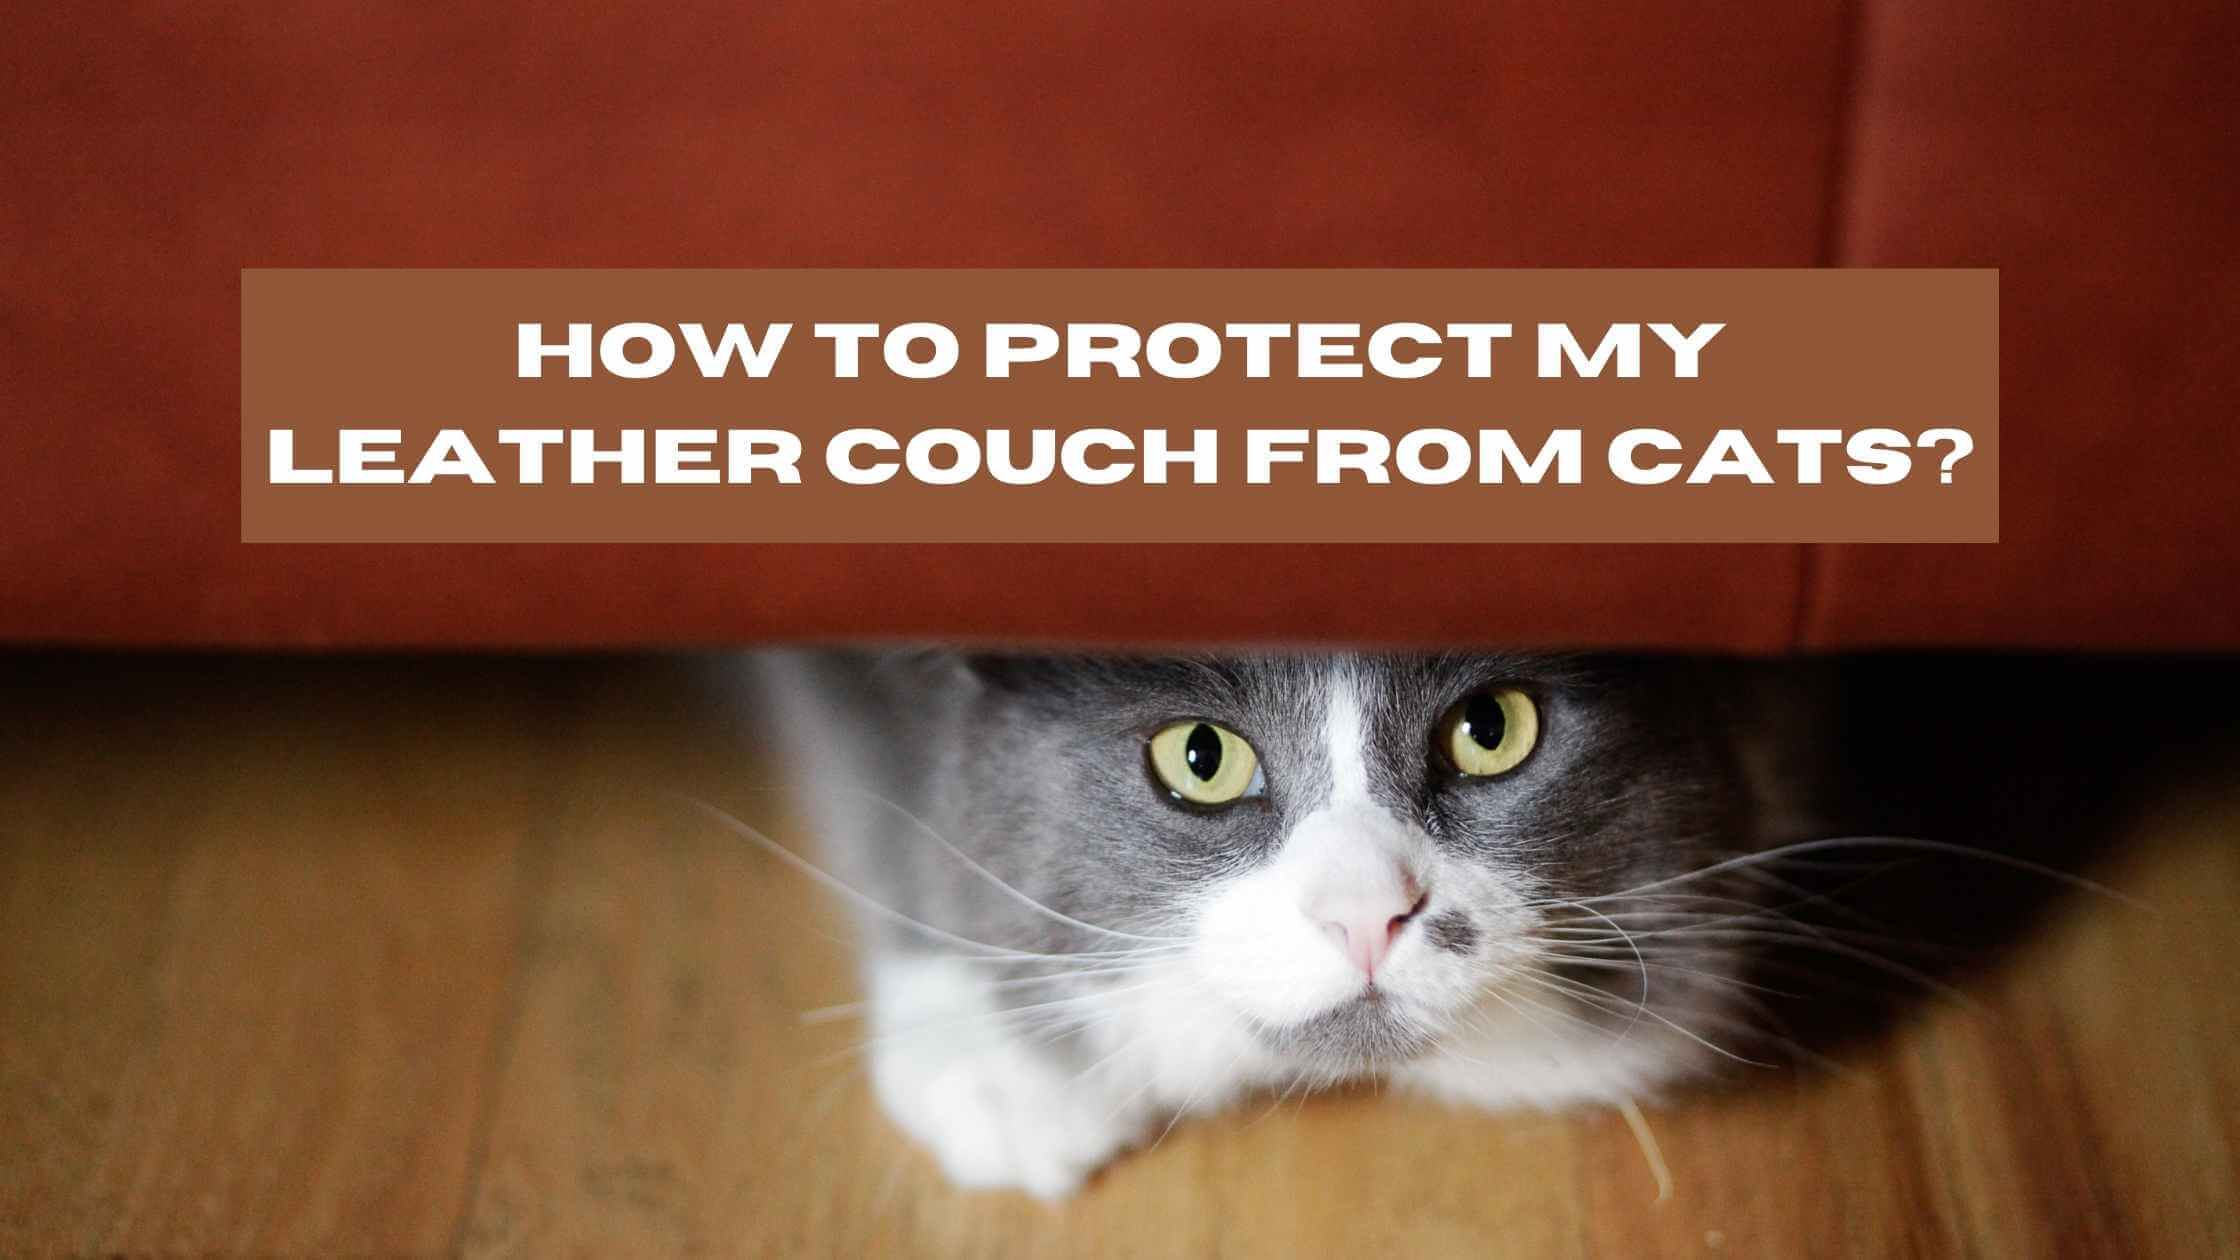 How to Protect My Leather Couch From Cats